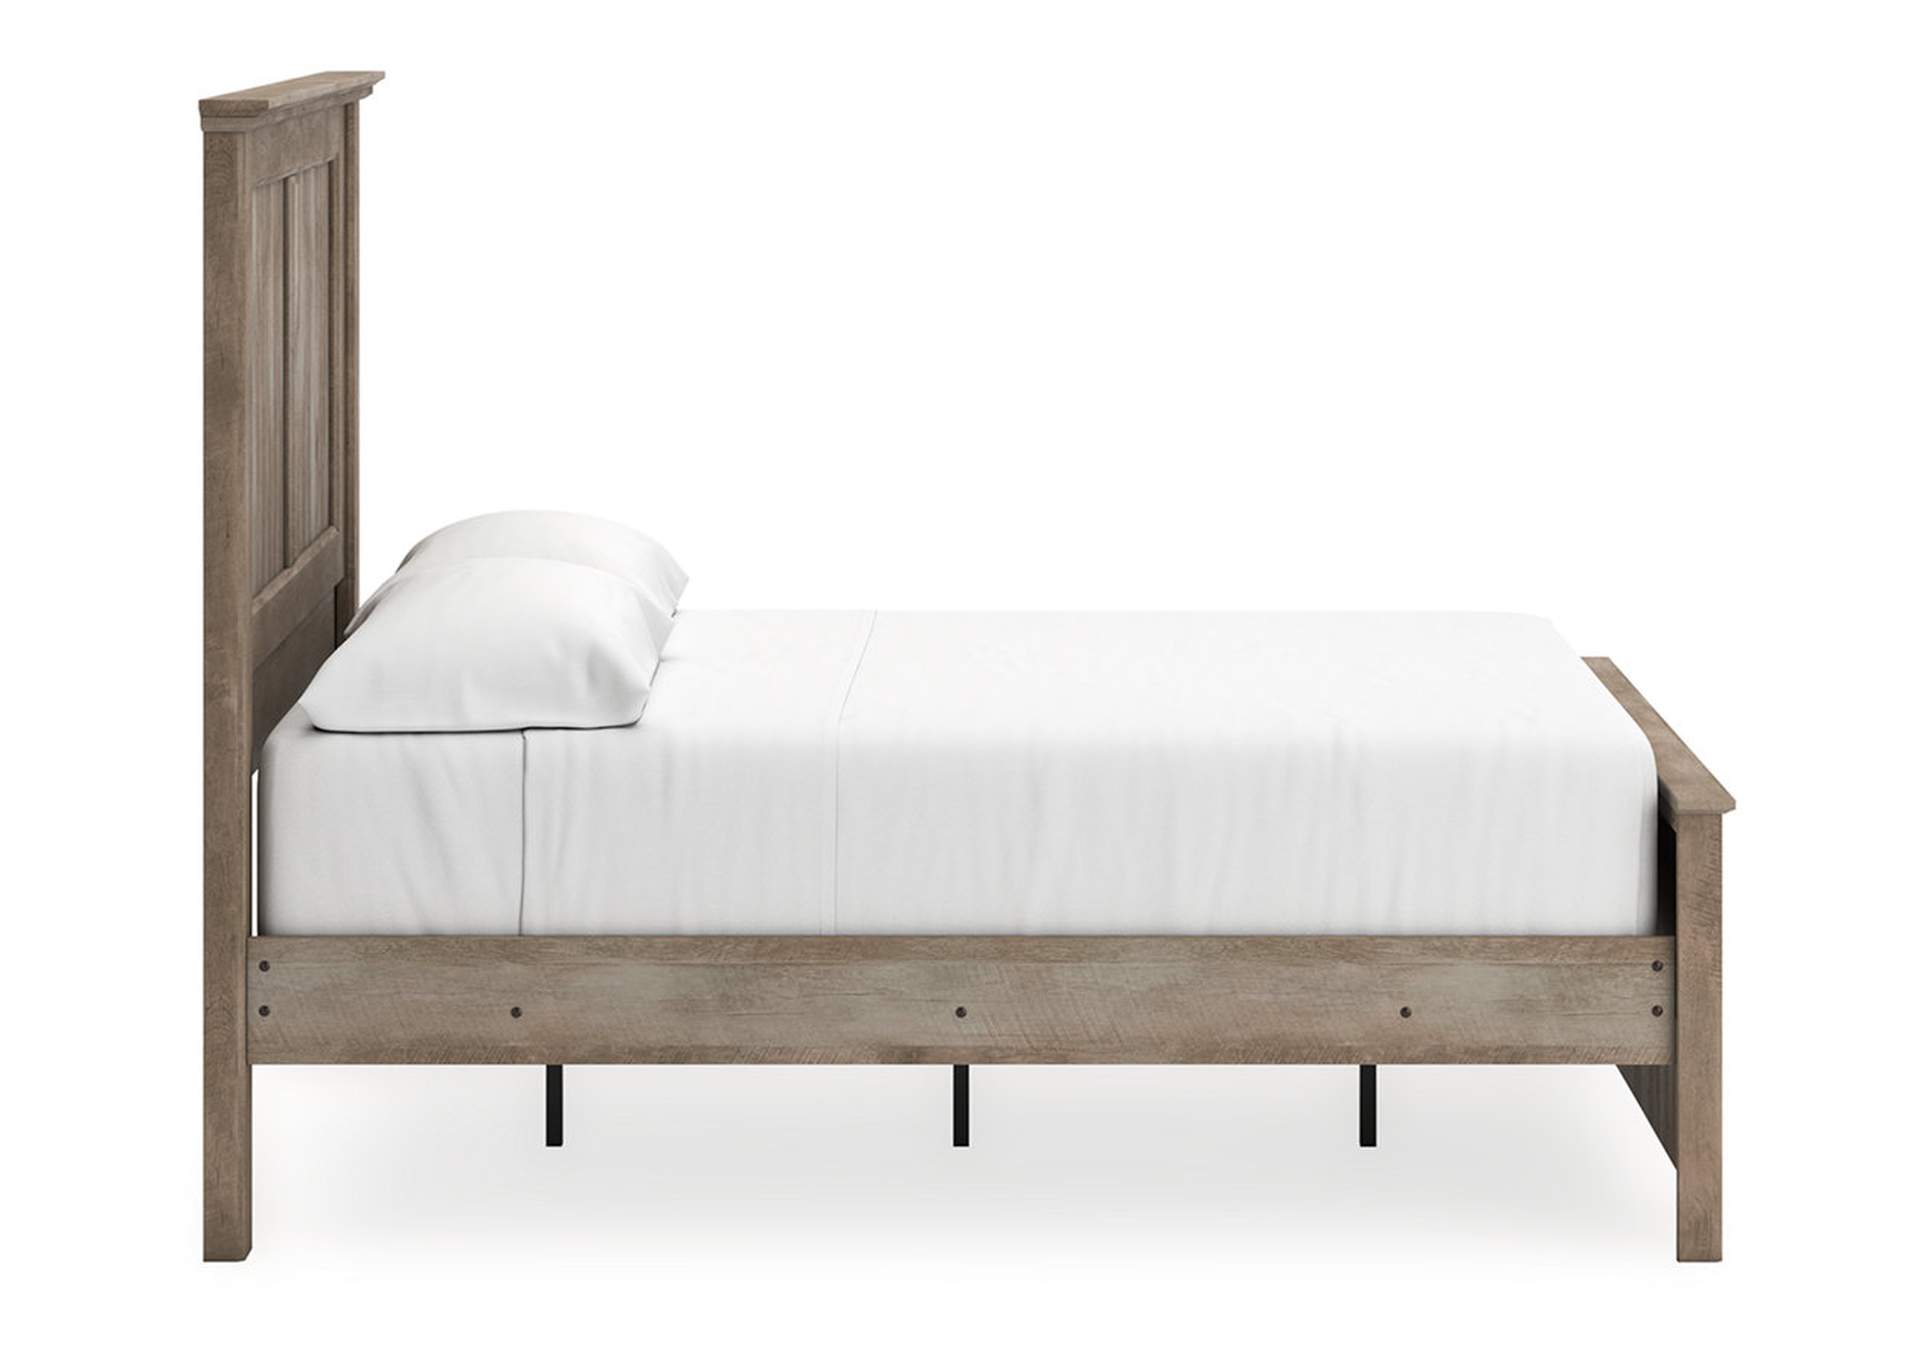 Yarbeck Queen Panel Bed,Signature Design By Ashley